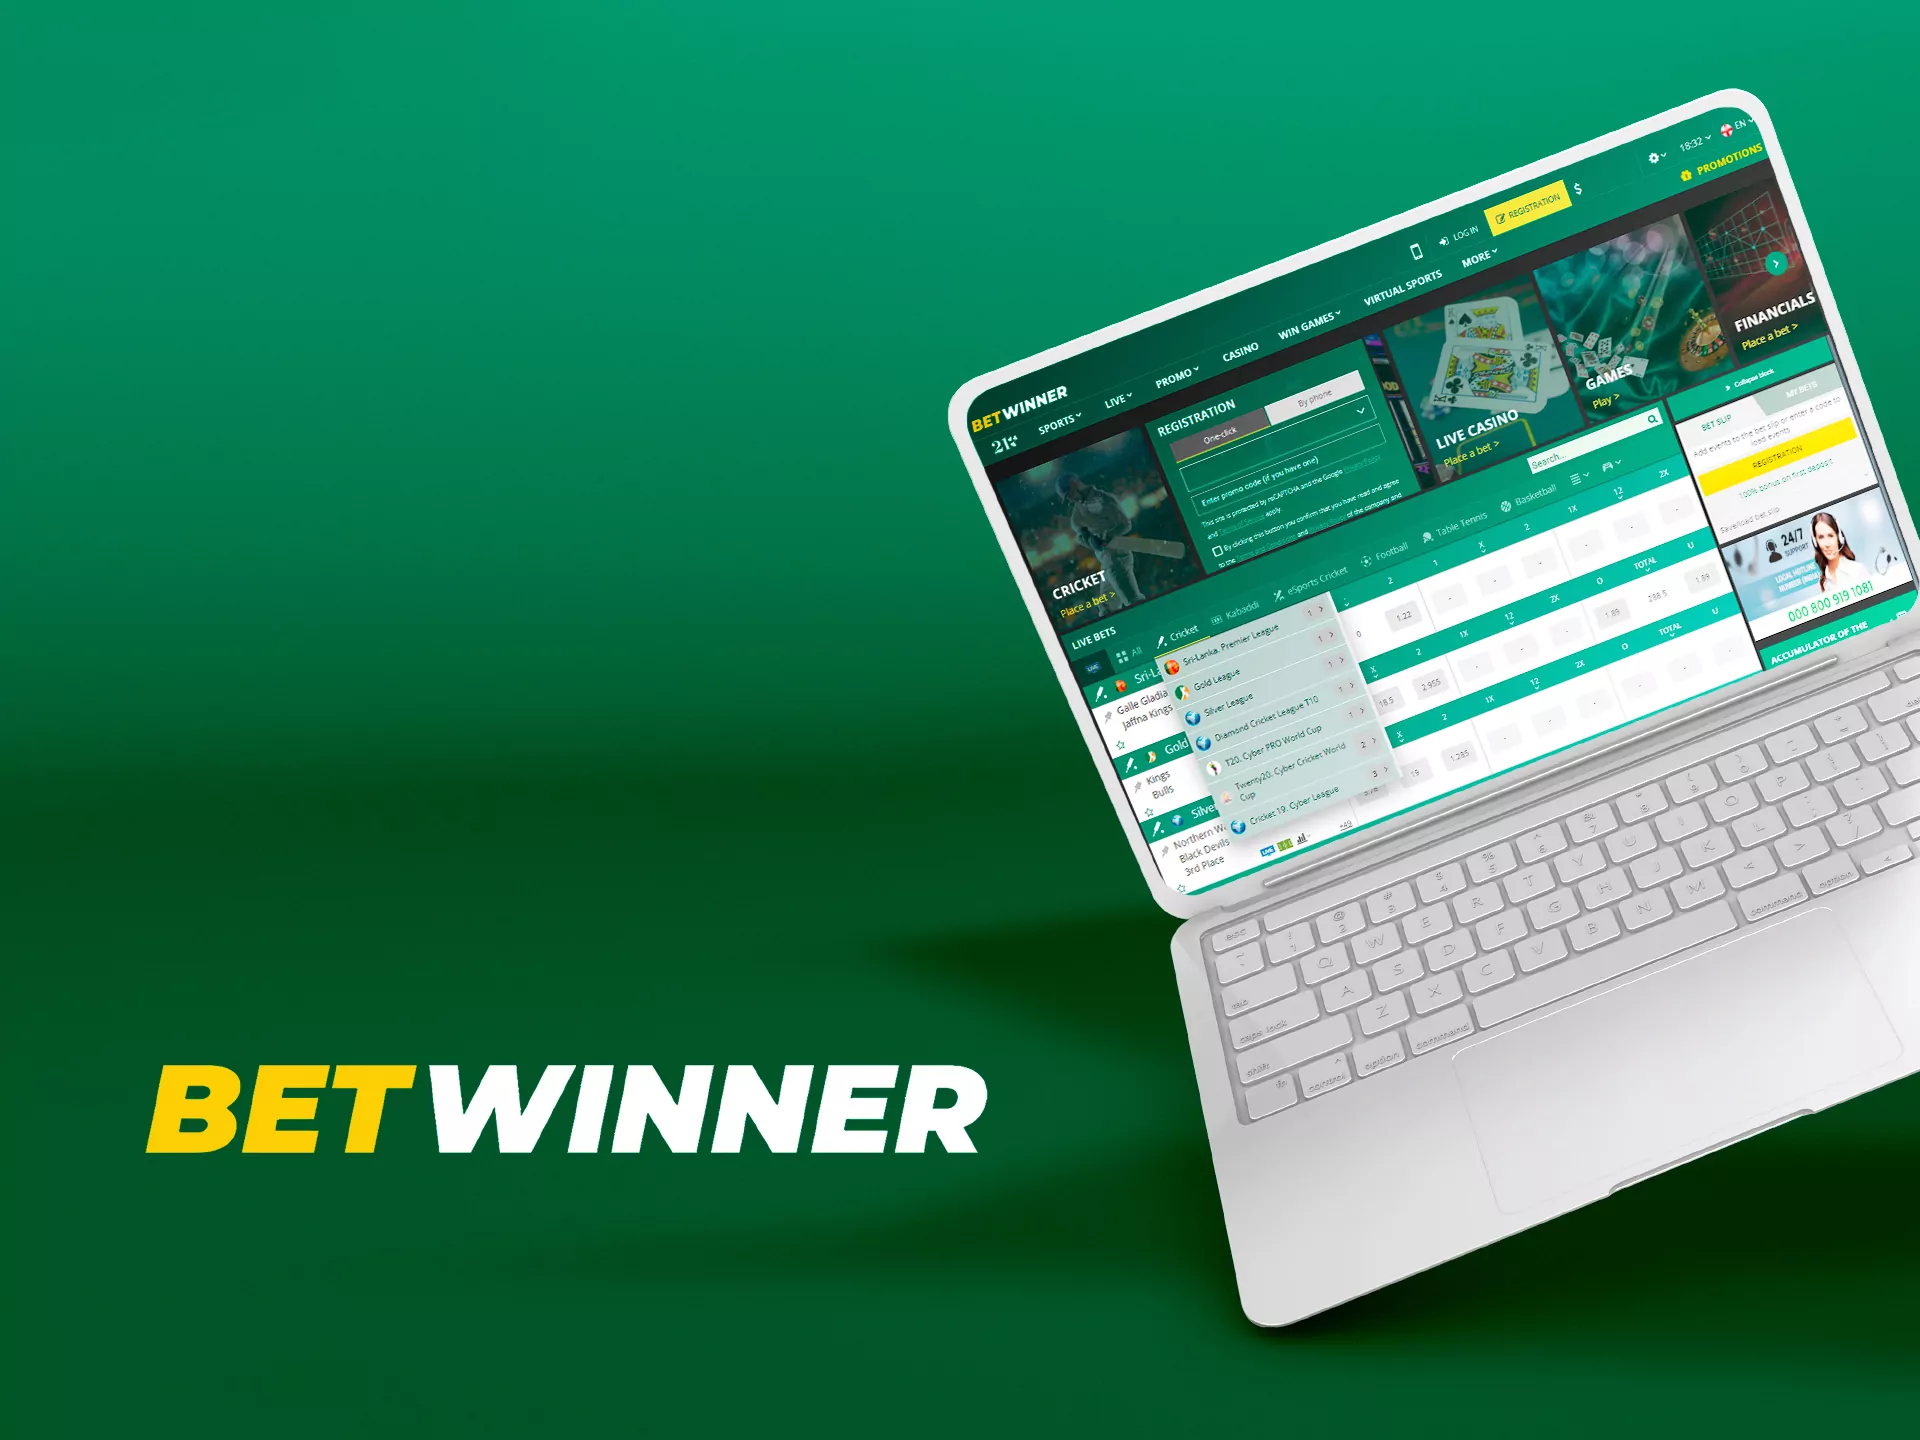 Betwinner is a young bookmaker for betting on cricket since it was founded only in 2018.